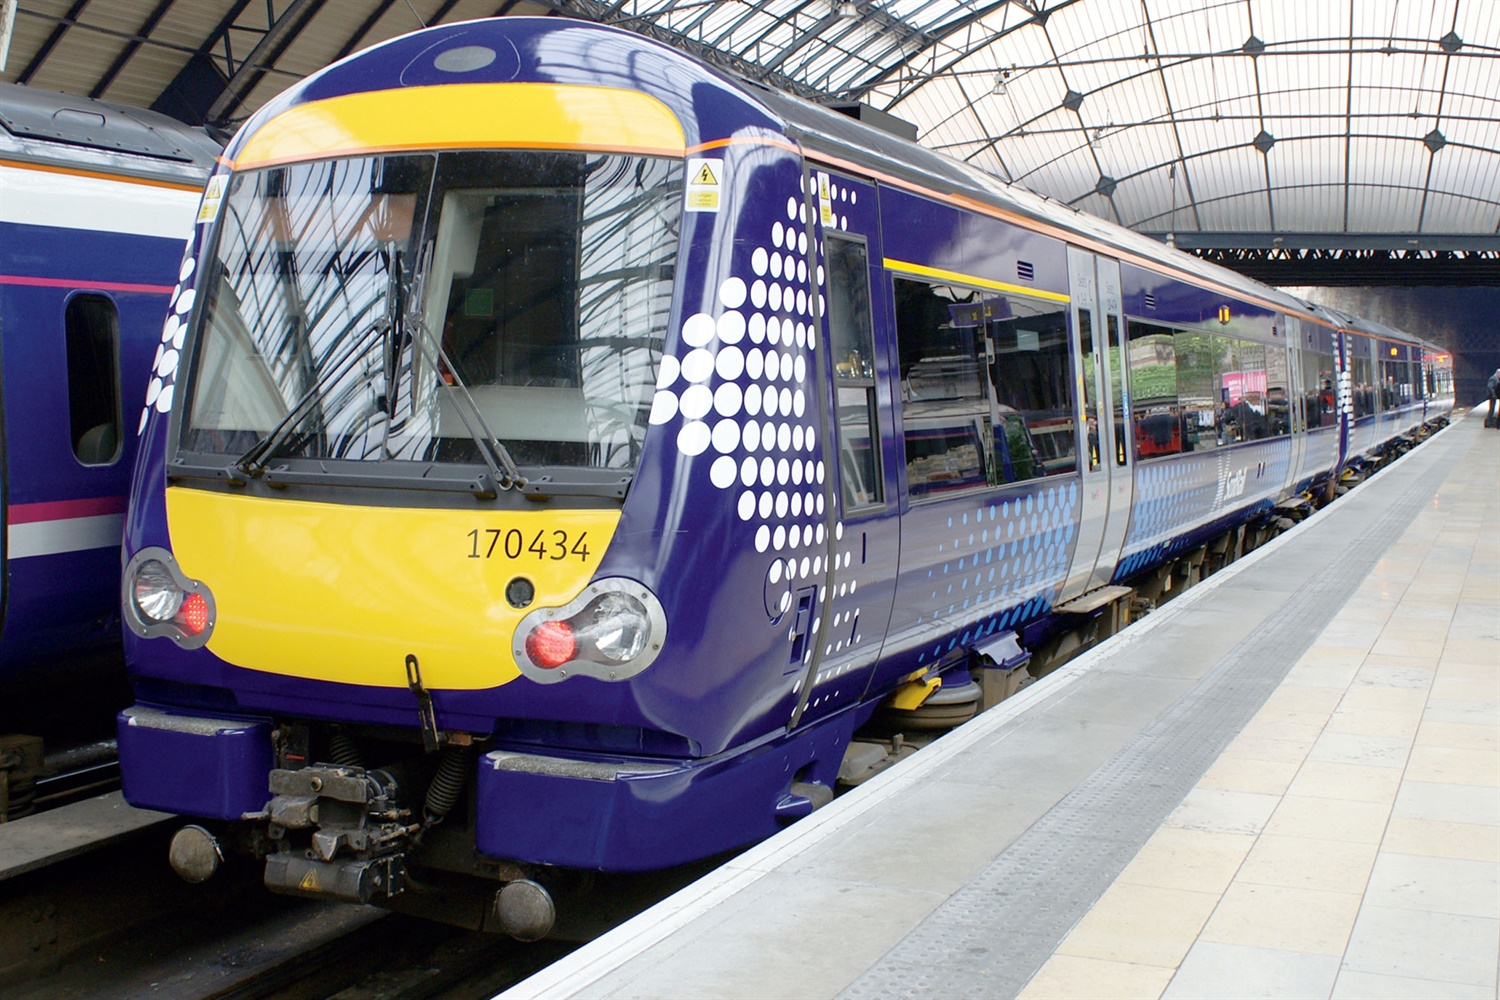 New franchises take over Scotland’s railway and sleeper services